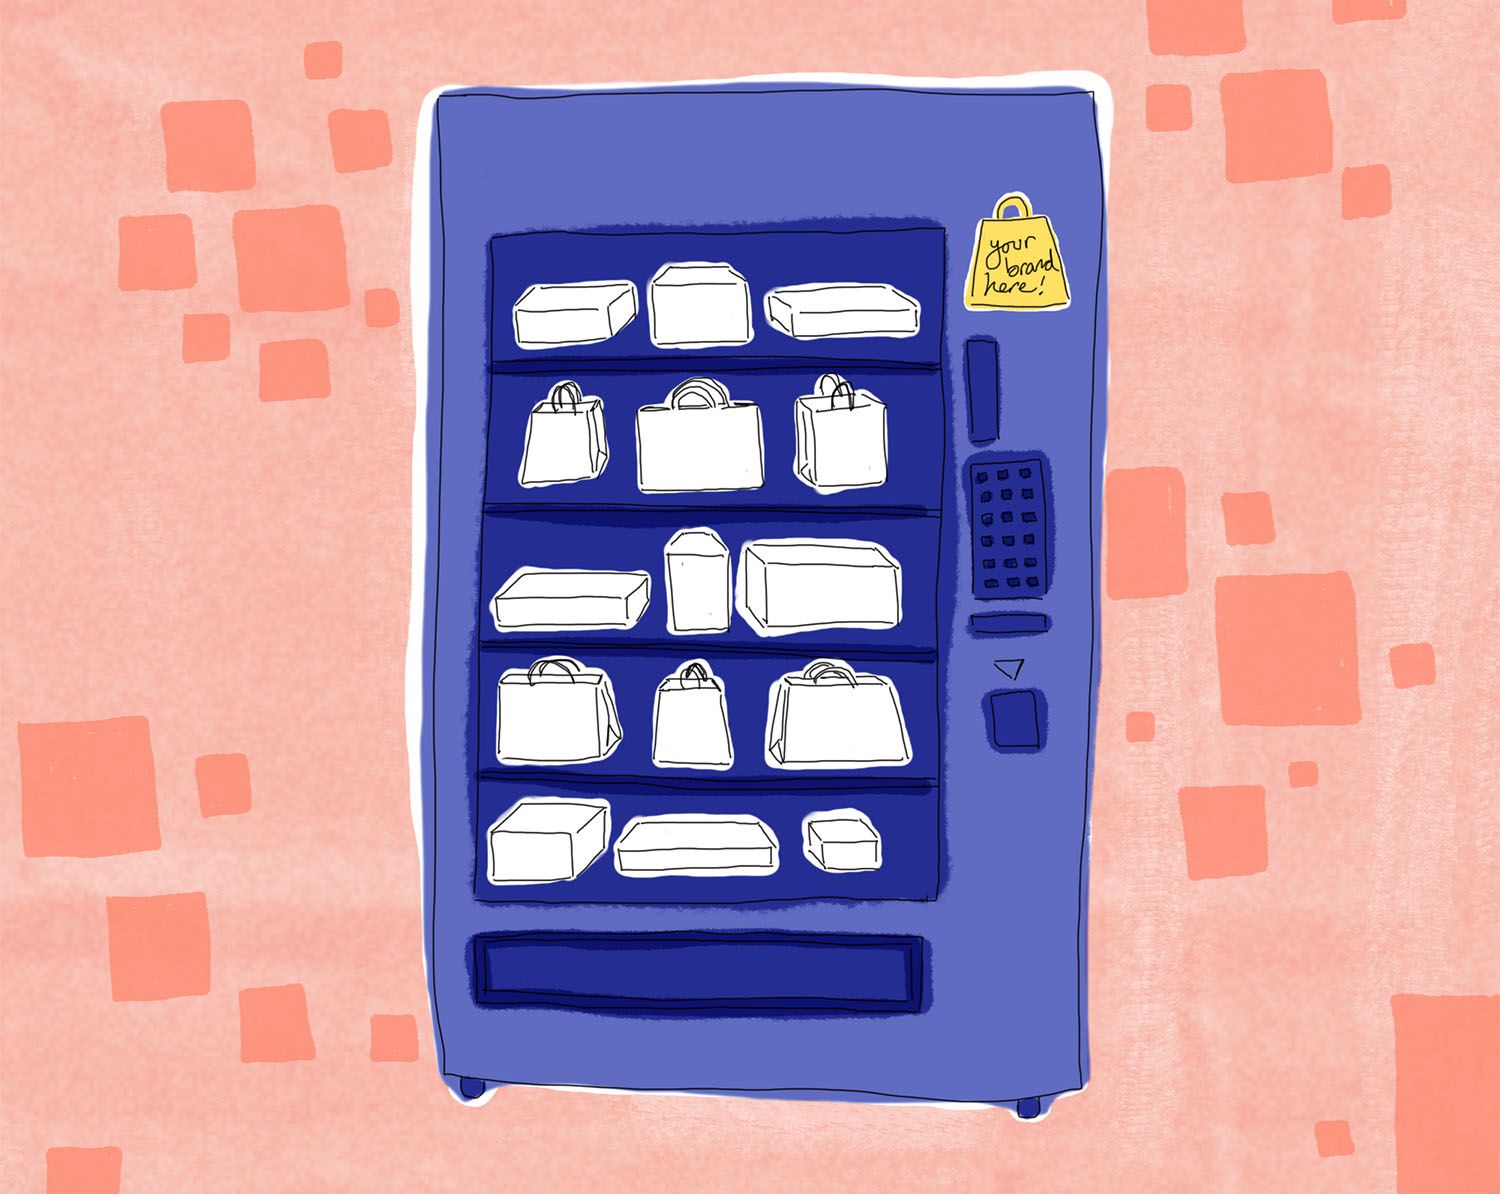 Illustration of vending machine full of blank packages with wording "your brand here"